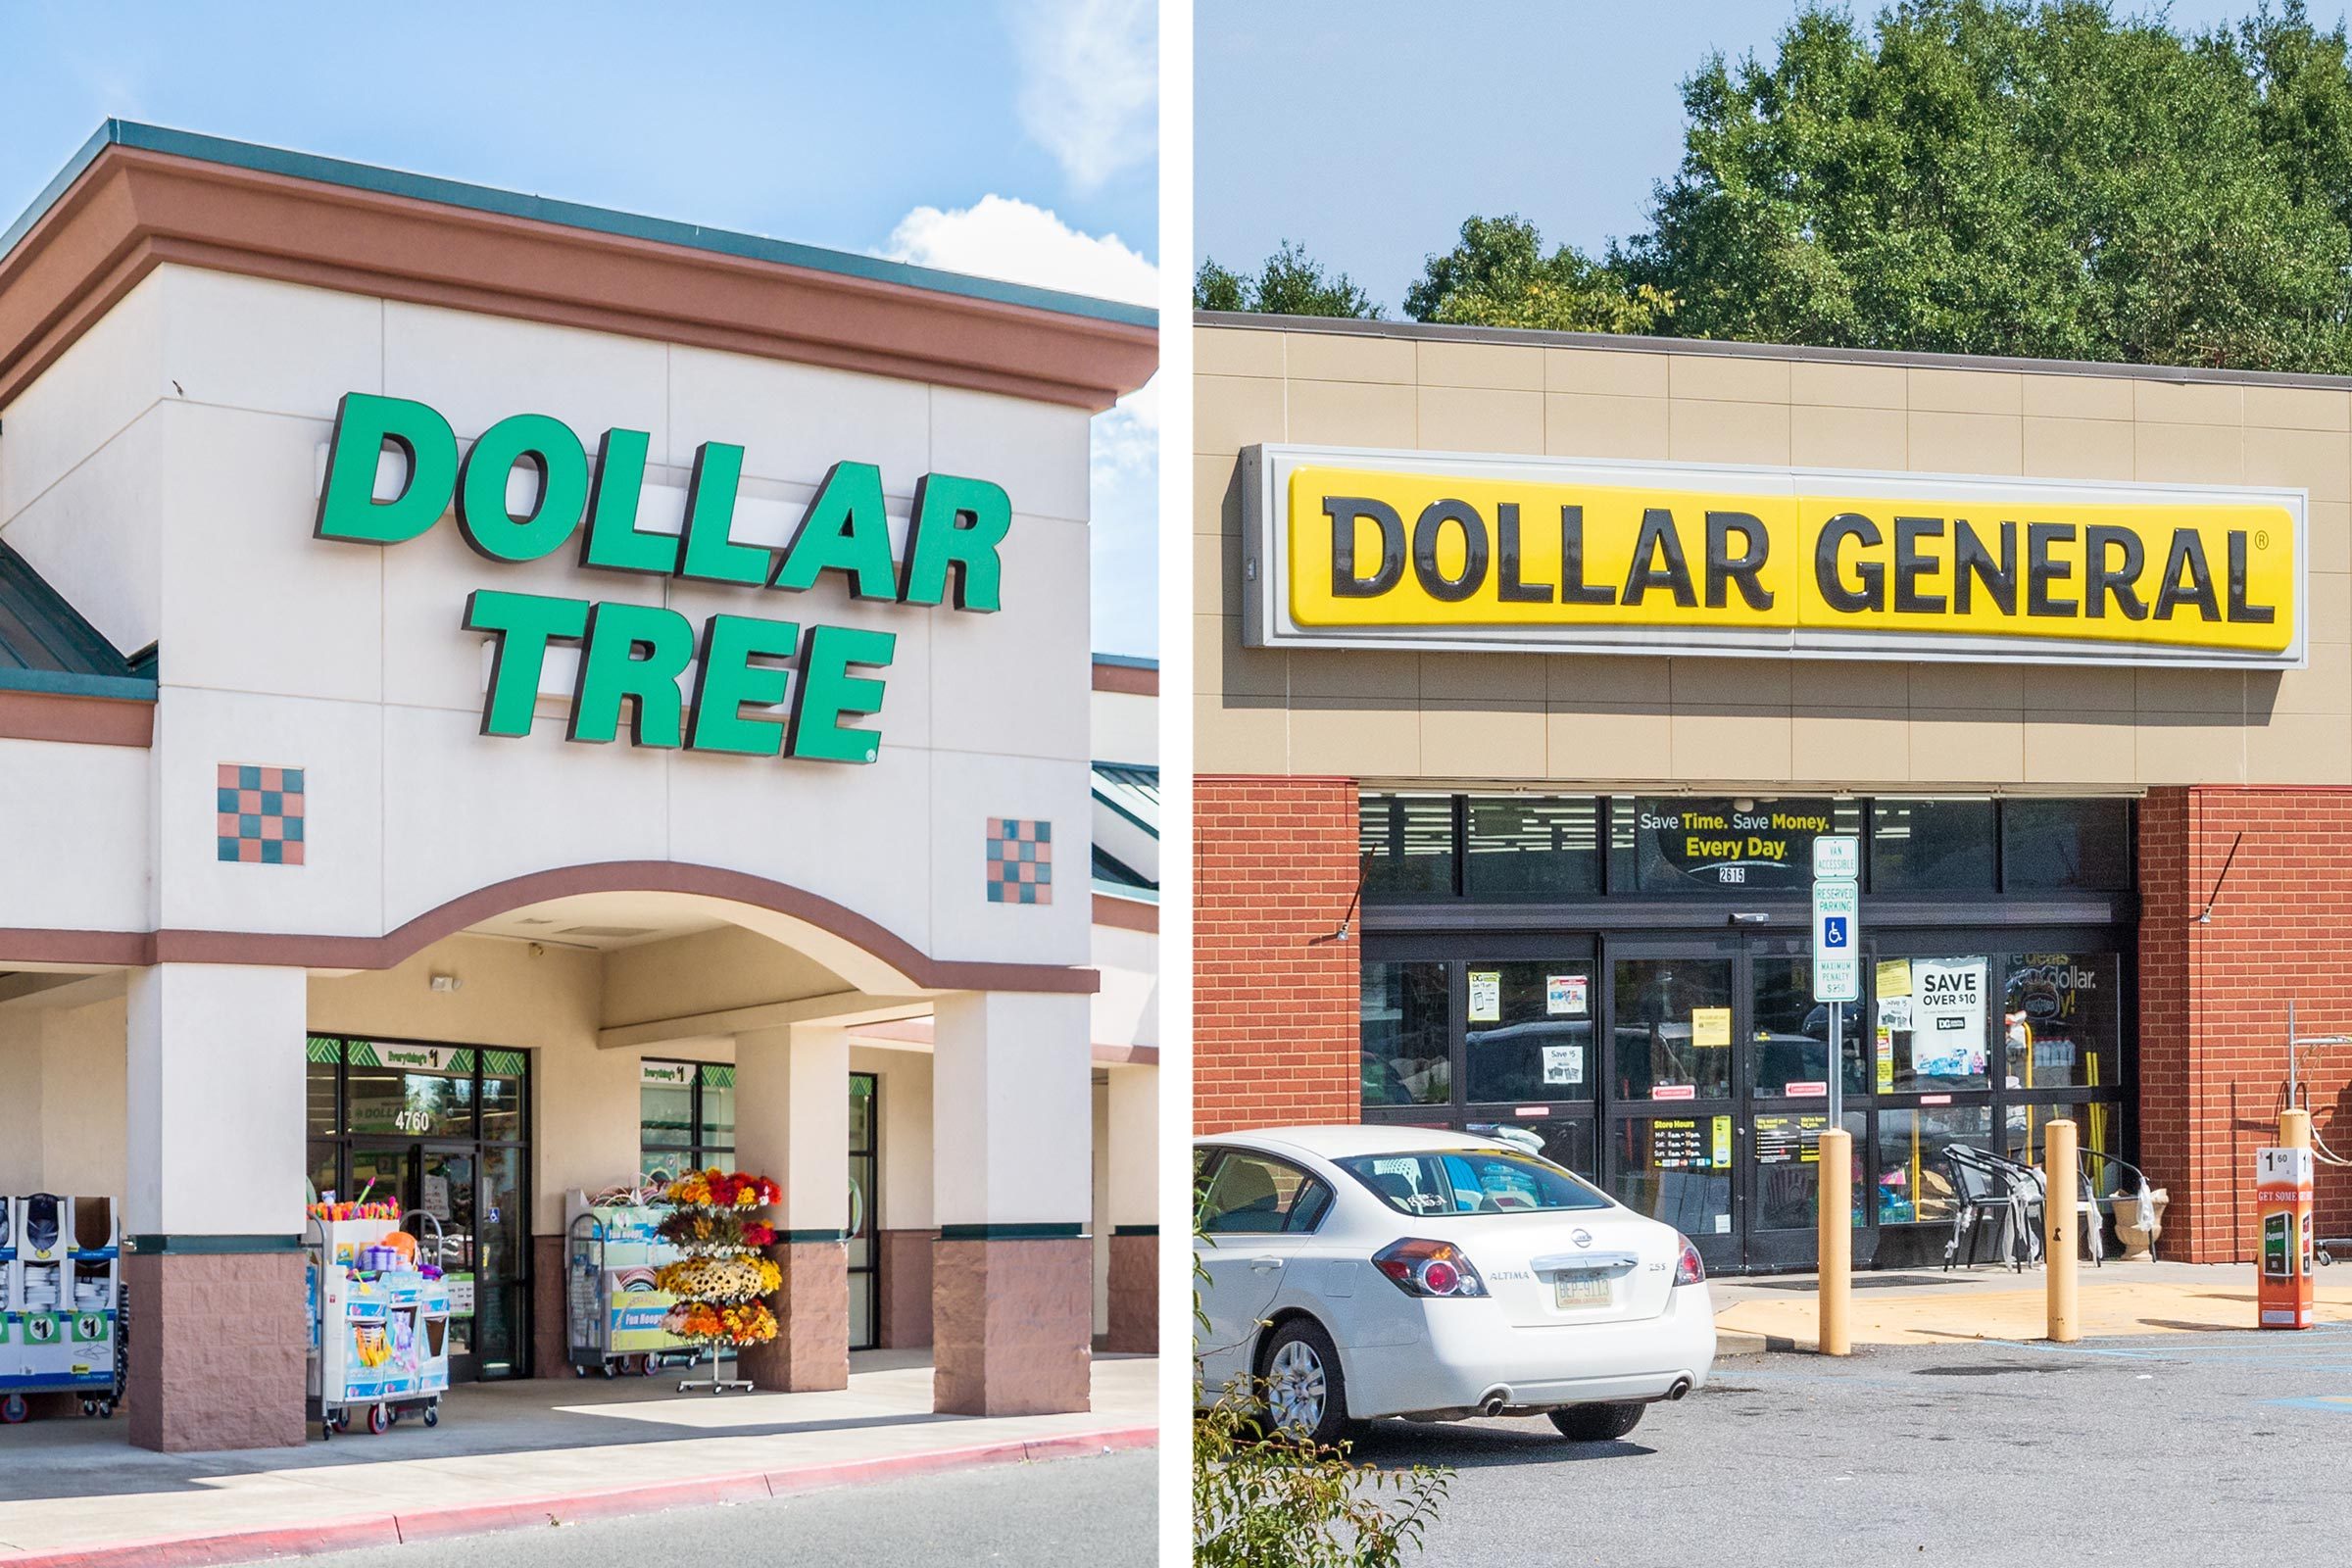 Still Worth Shopping at Dollar Tree After Price Increase - Consumer Reports